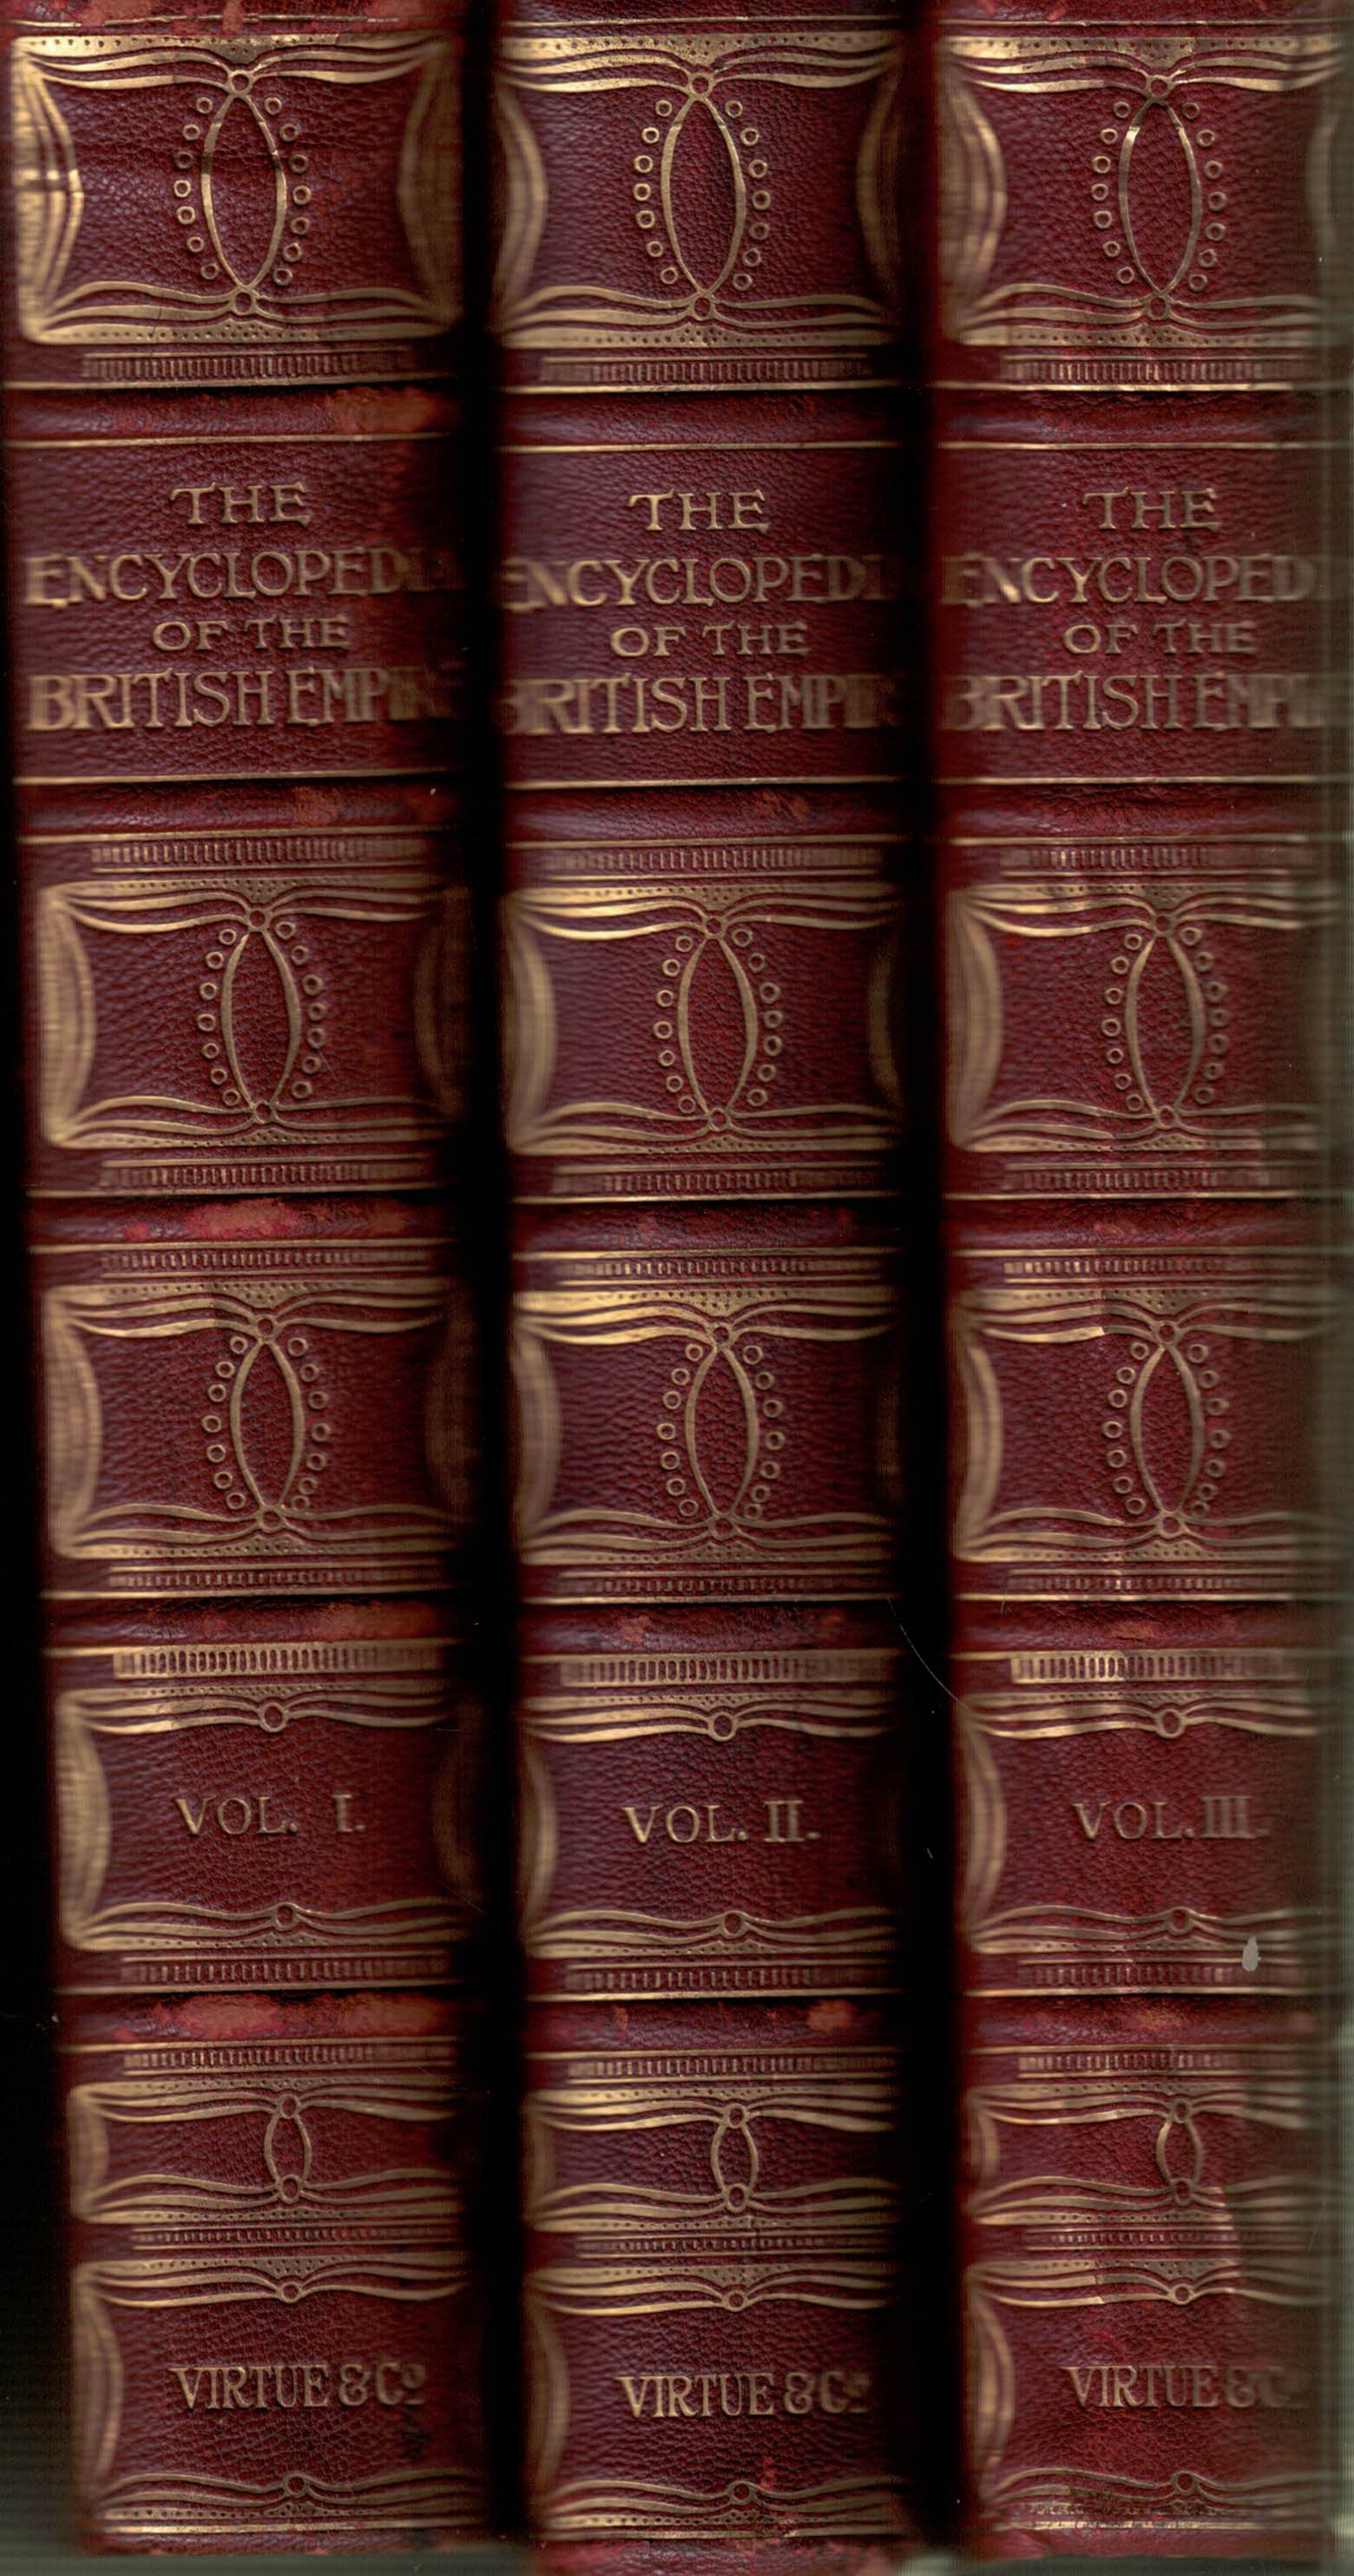 The Encyclopedia of the British Empire. The First Encyclopedic Record of The Greatest Empire in The History of the World. 3 volume set.